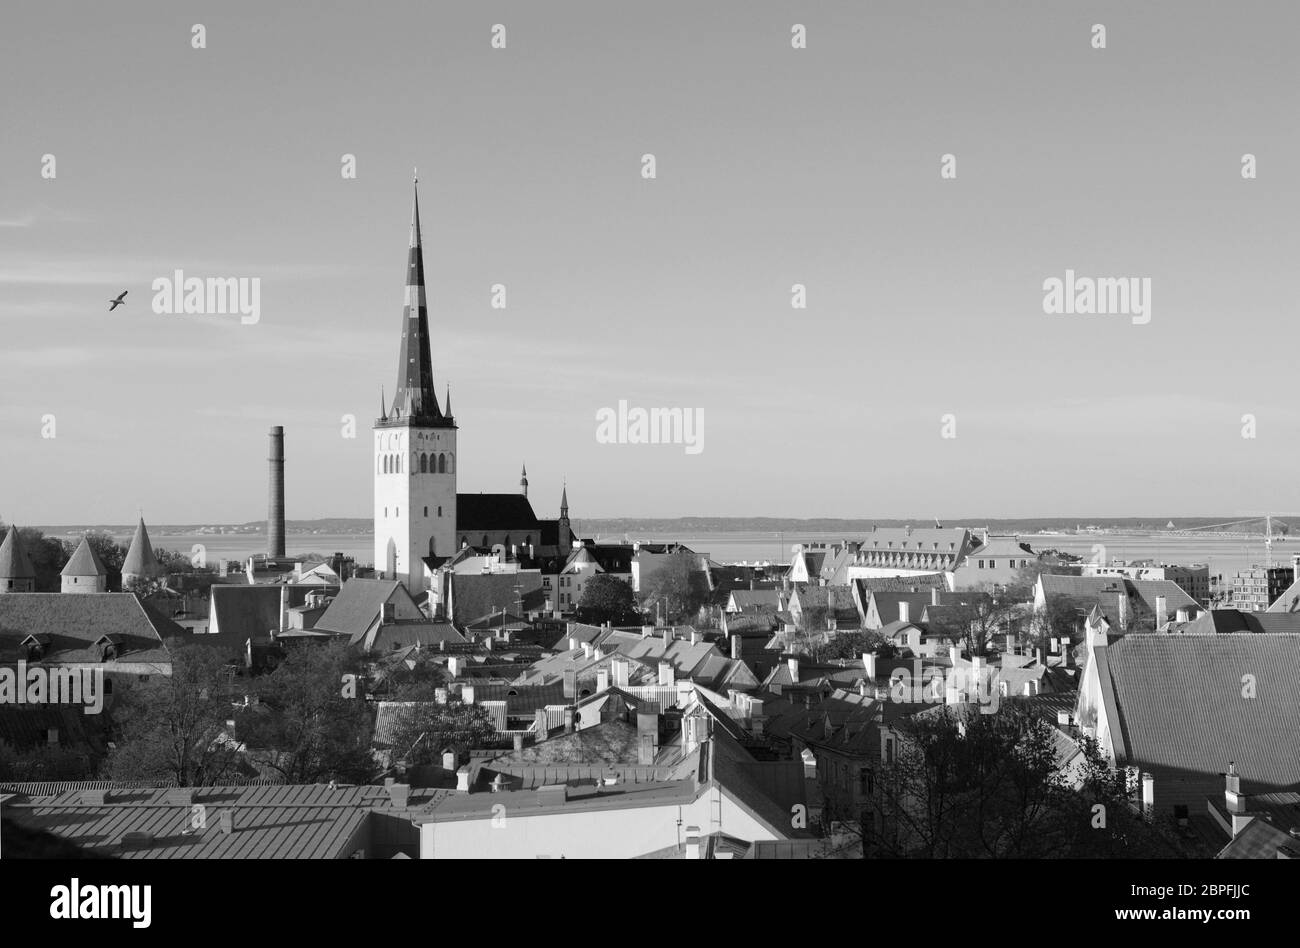 St Olaf's Church tower stands above the tiled roofs of the Old Town of Tallinn, capital city of Estonia. Beyond the cityscape lies Tallinn Bay - monoc Stock Photo